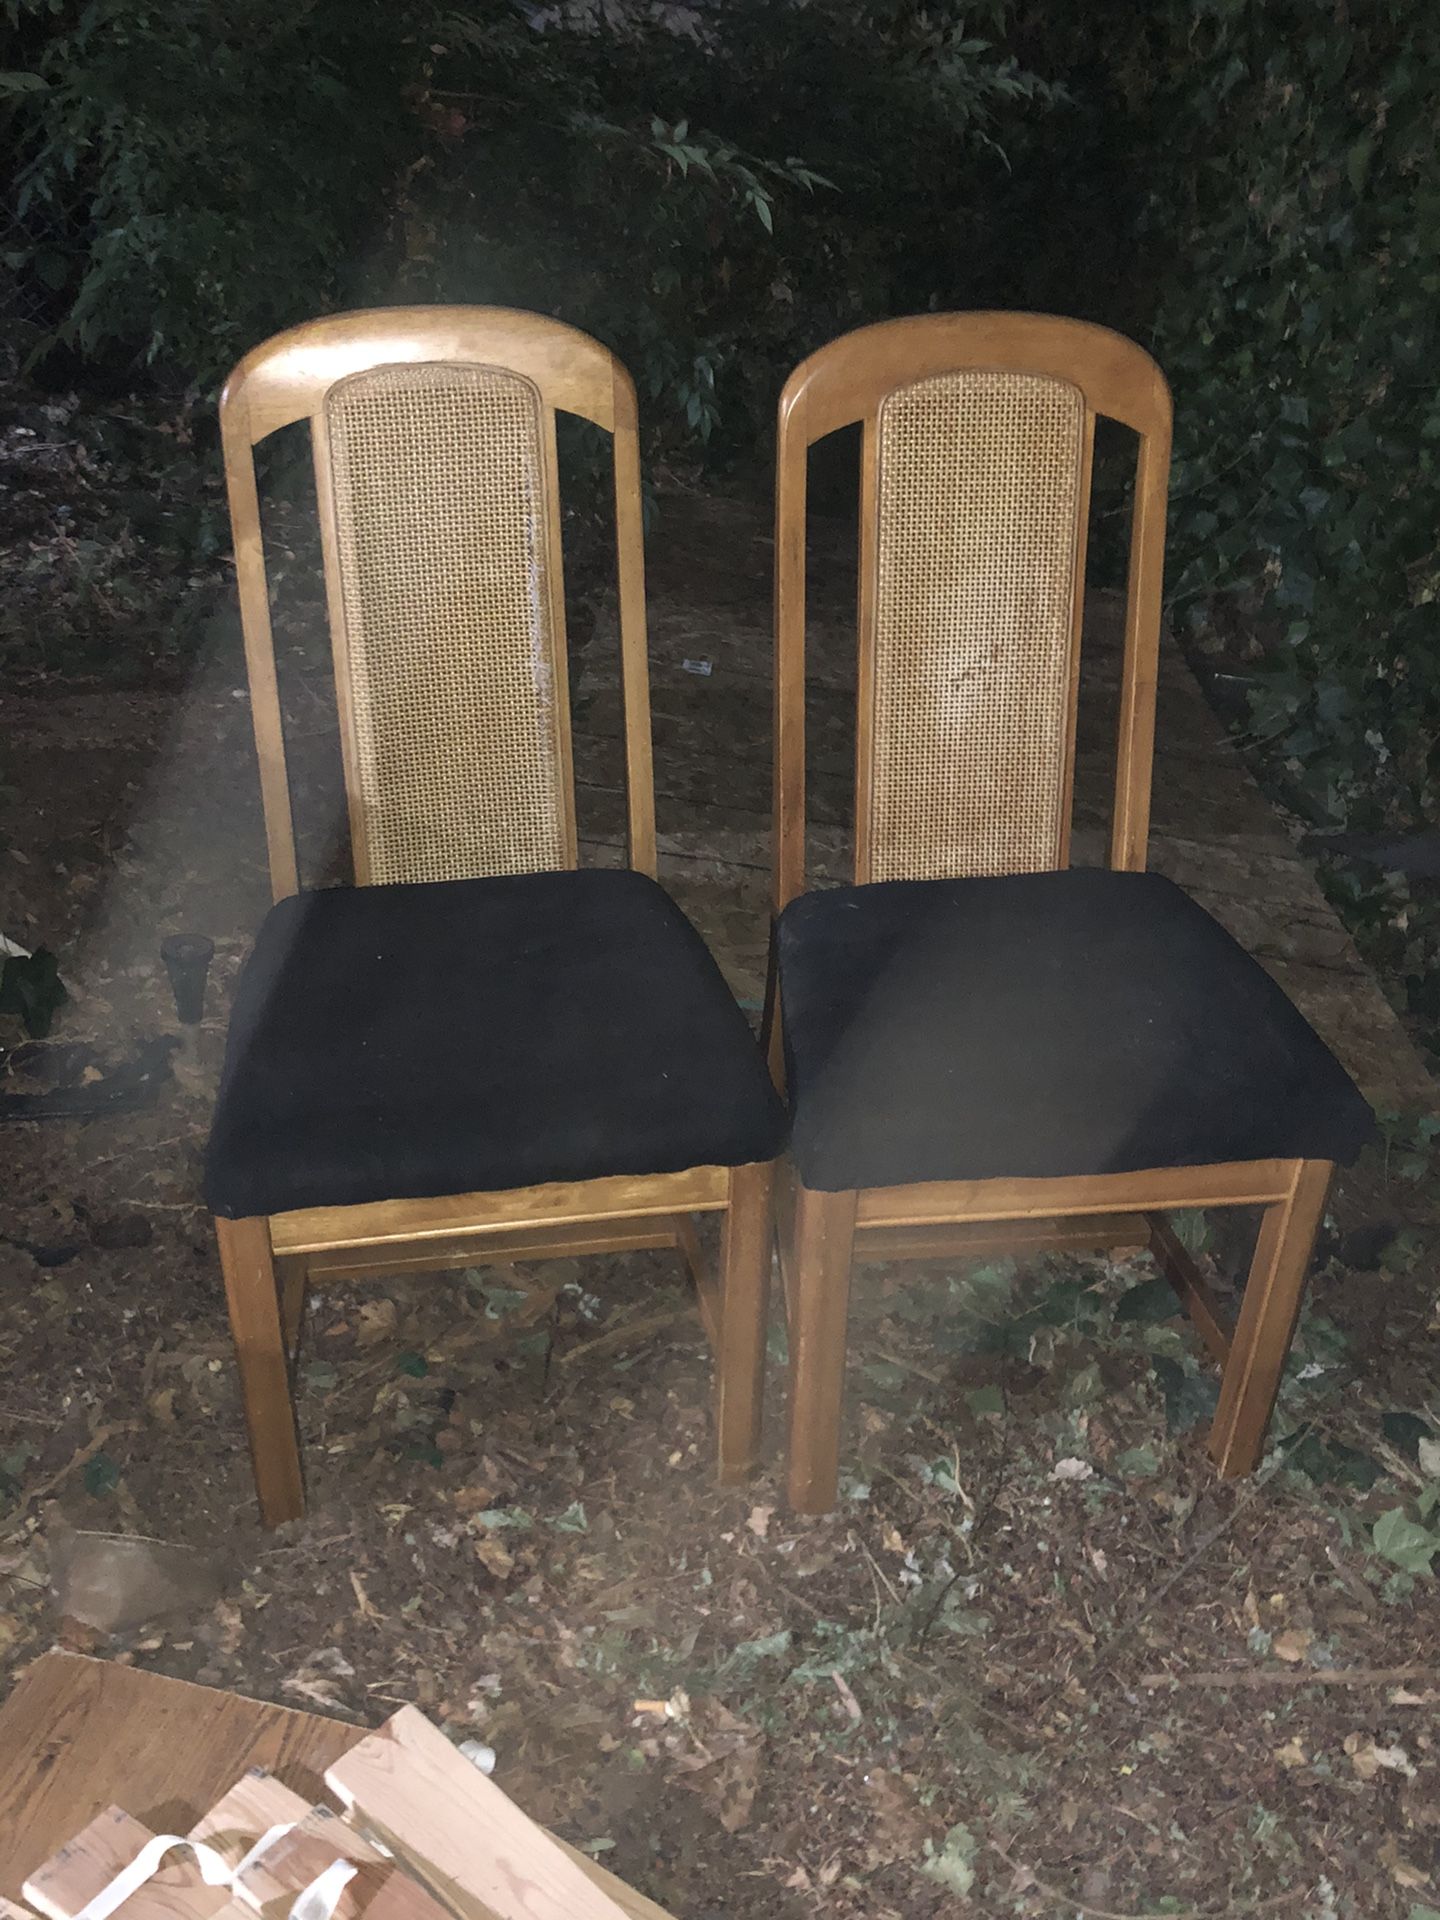 FREE CHAIRS